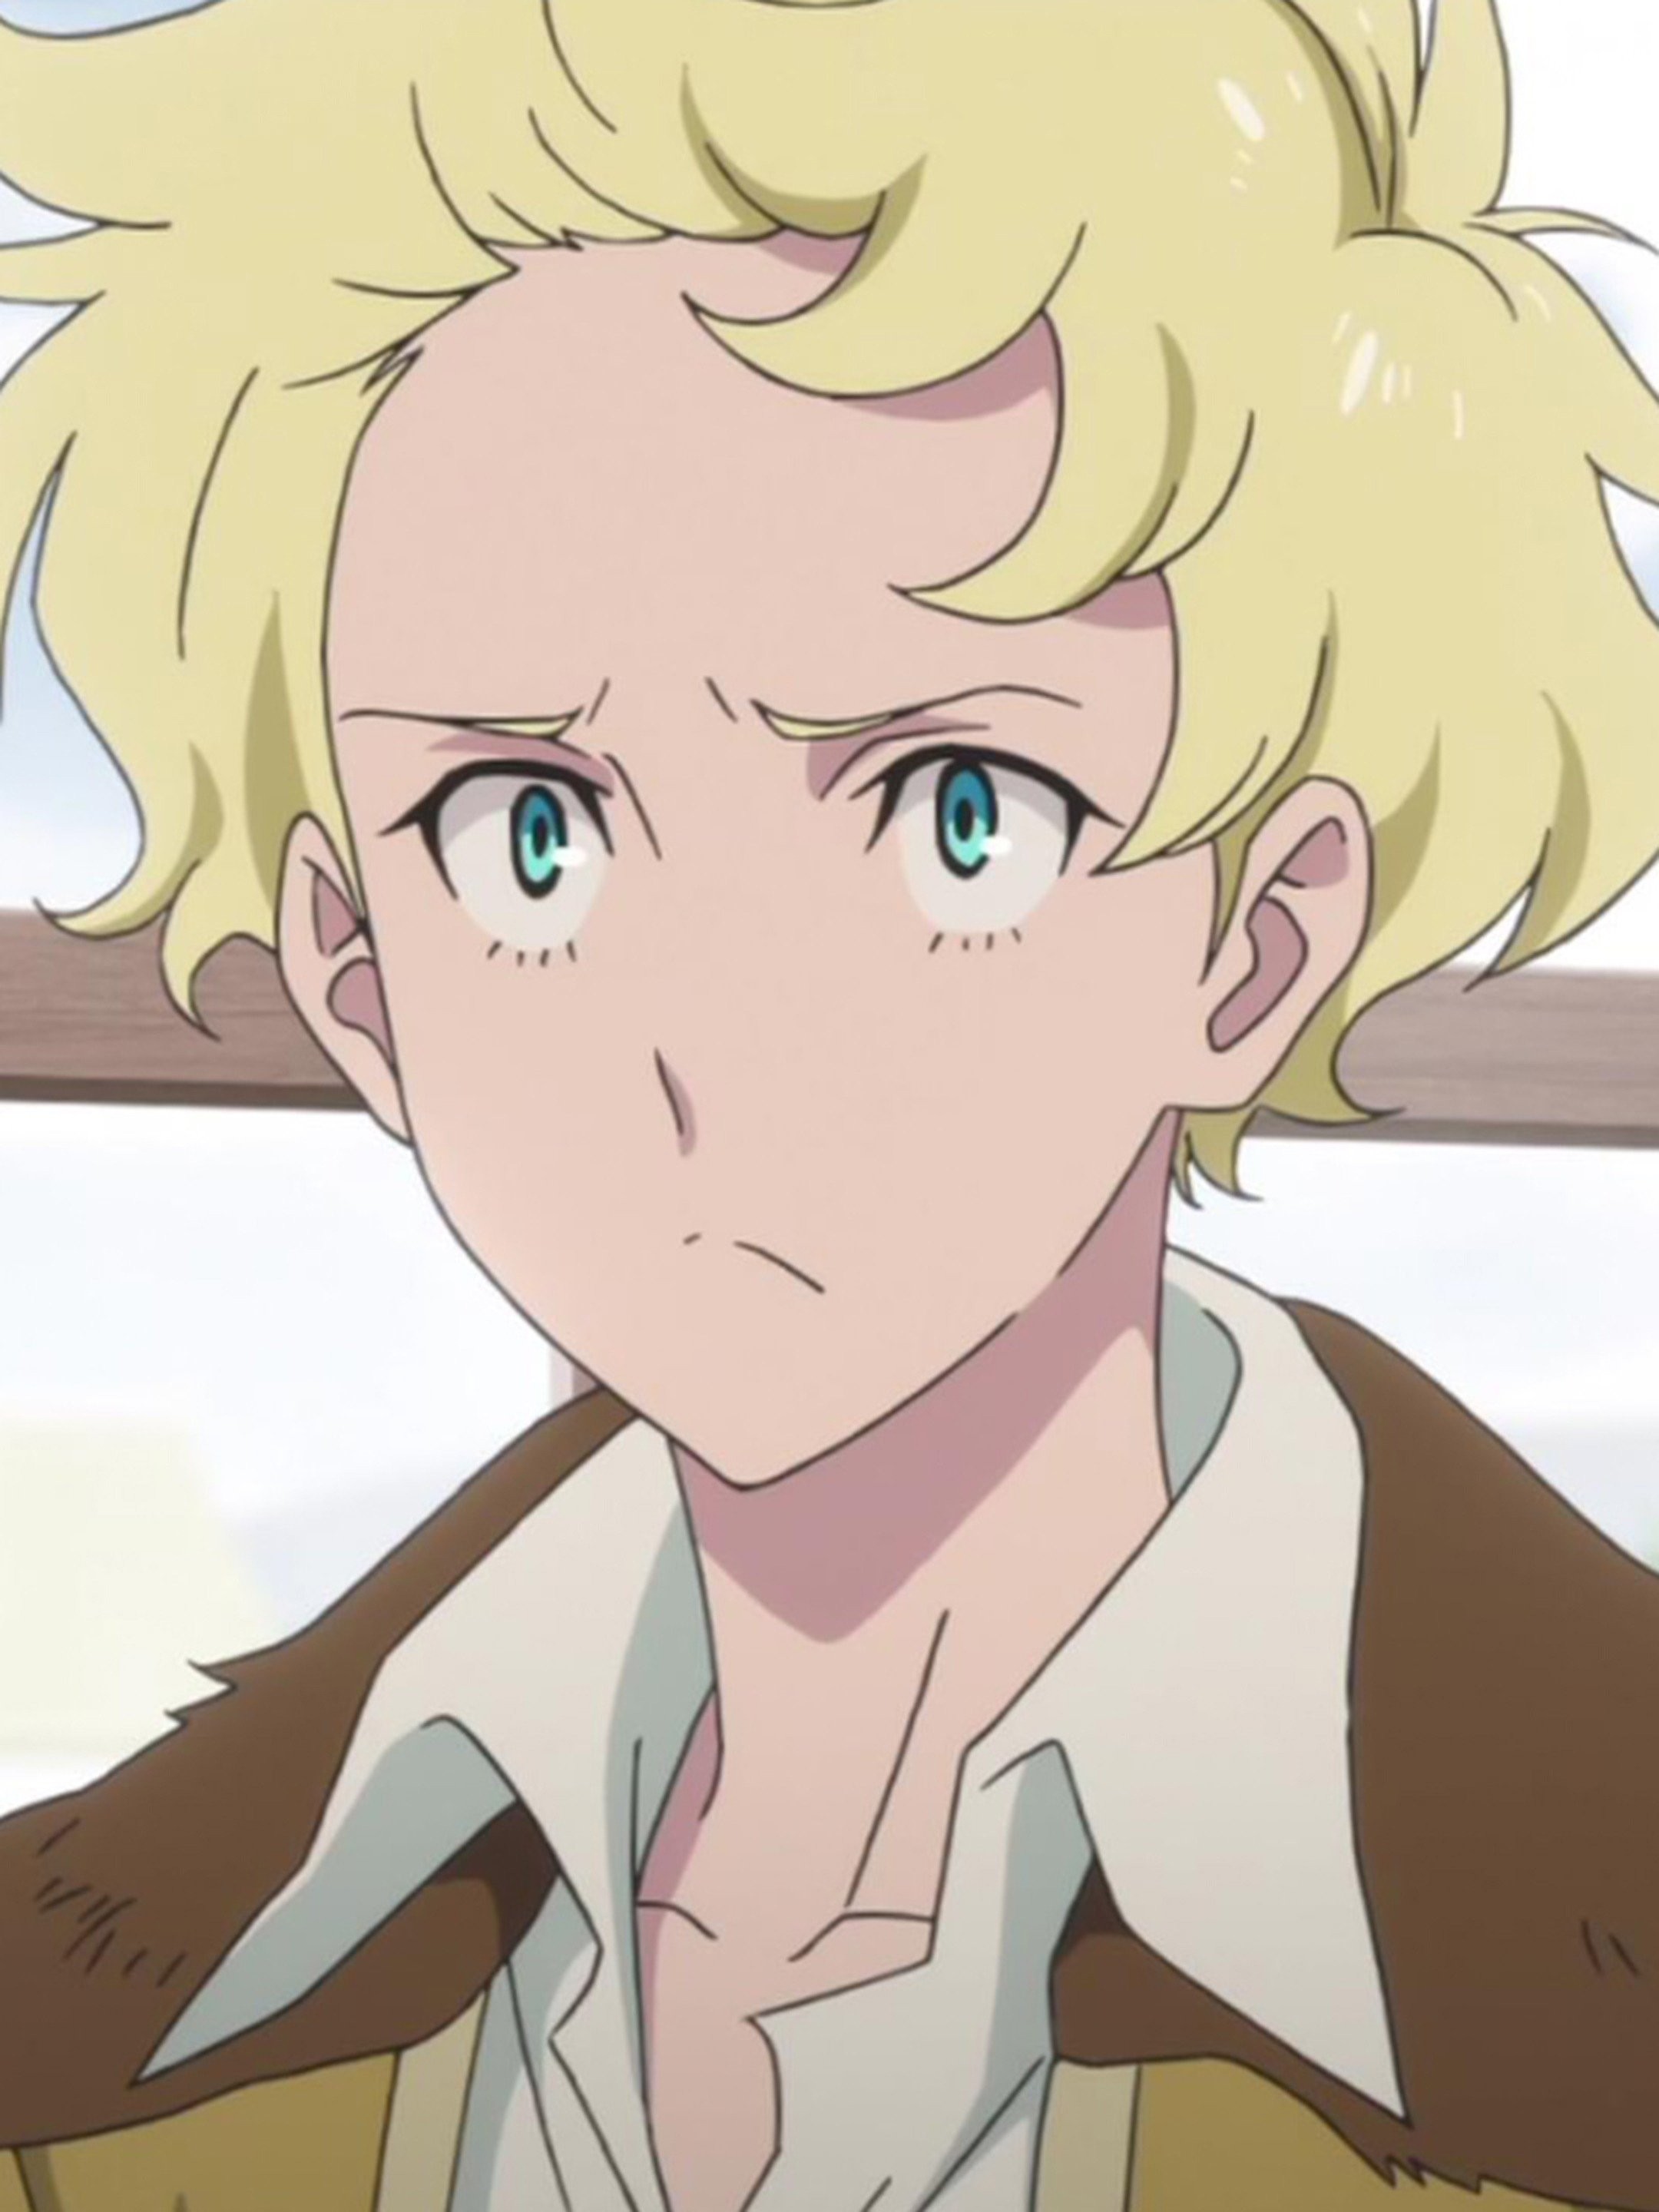 Yuliy Voice - Sirius the Jaeger (TV Show) - Behind The Voice Actors